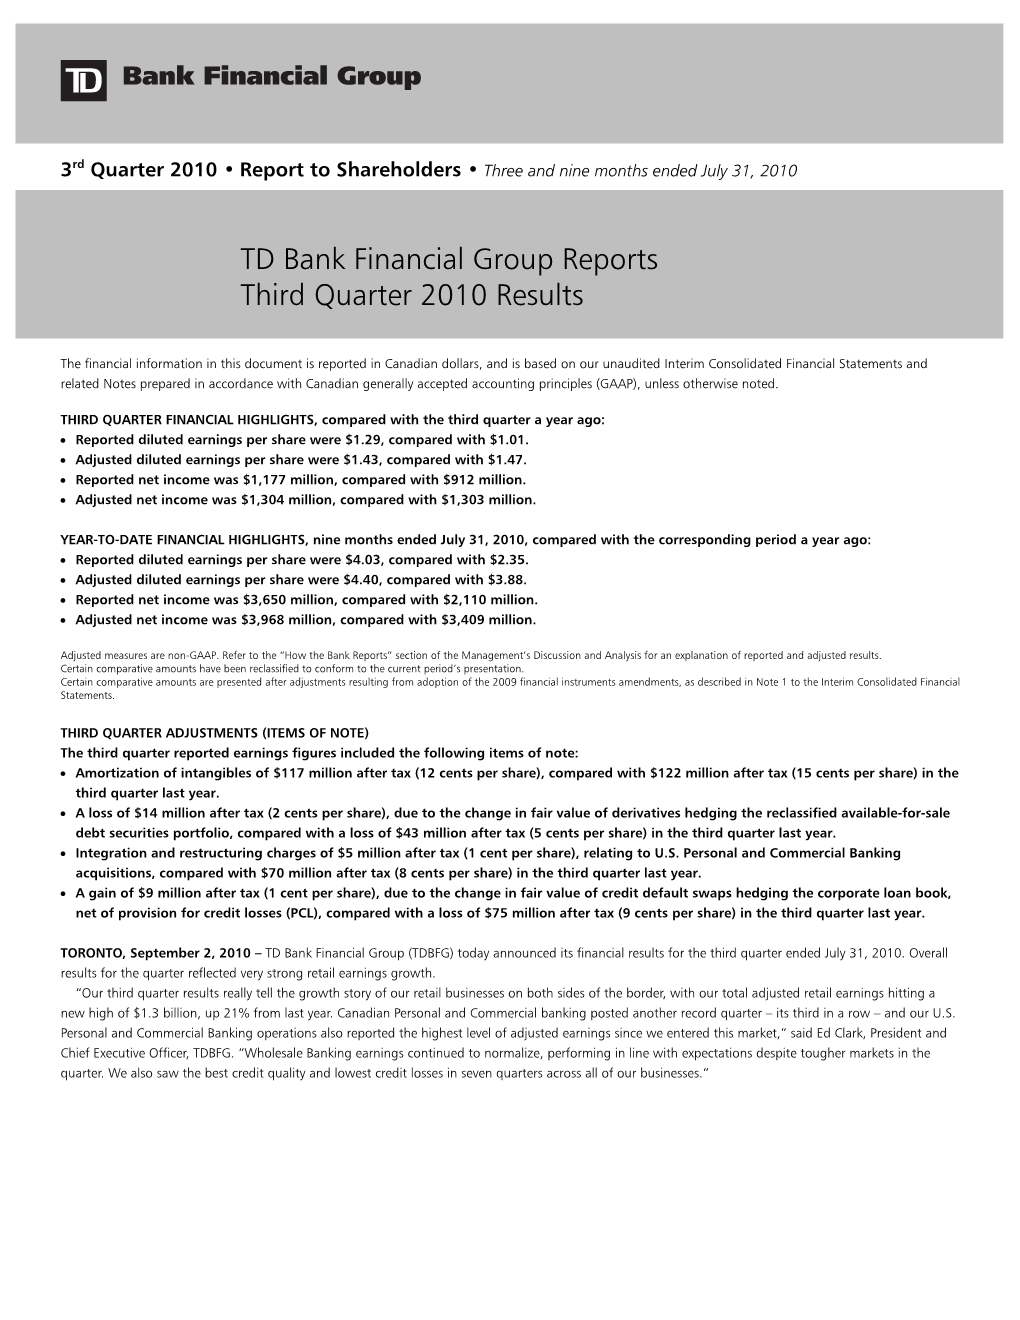 TD Bank Financial Group Reports Third Quarter 2010 Results